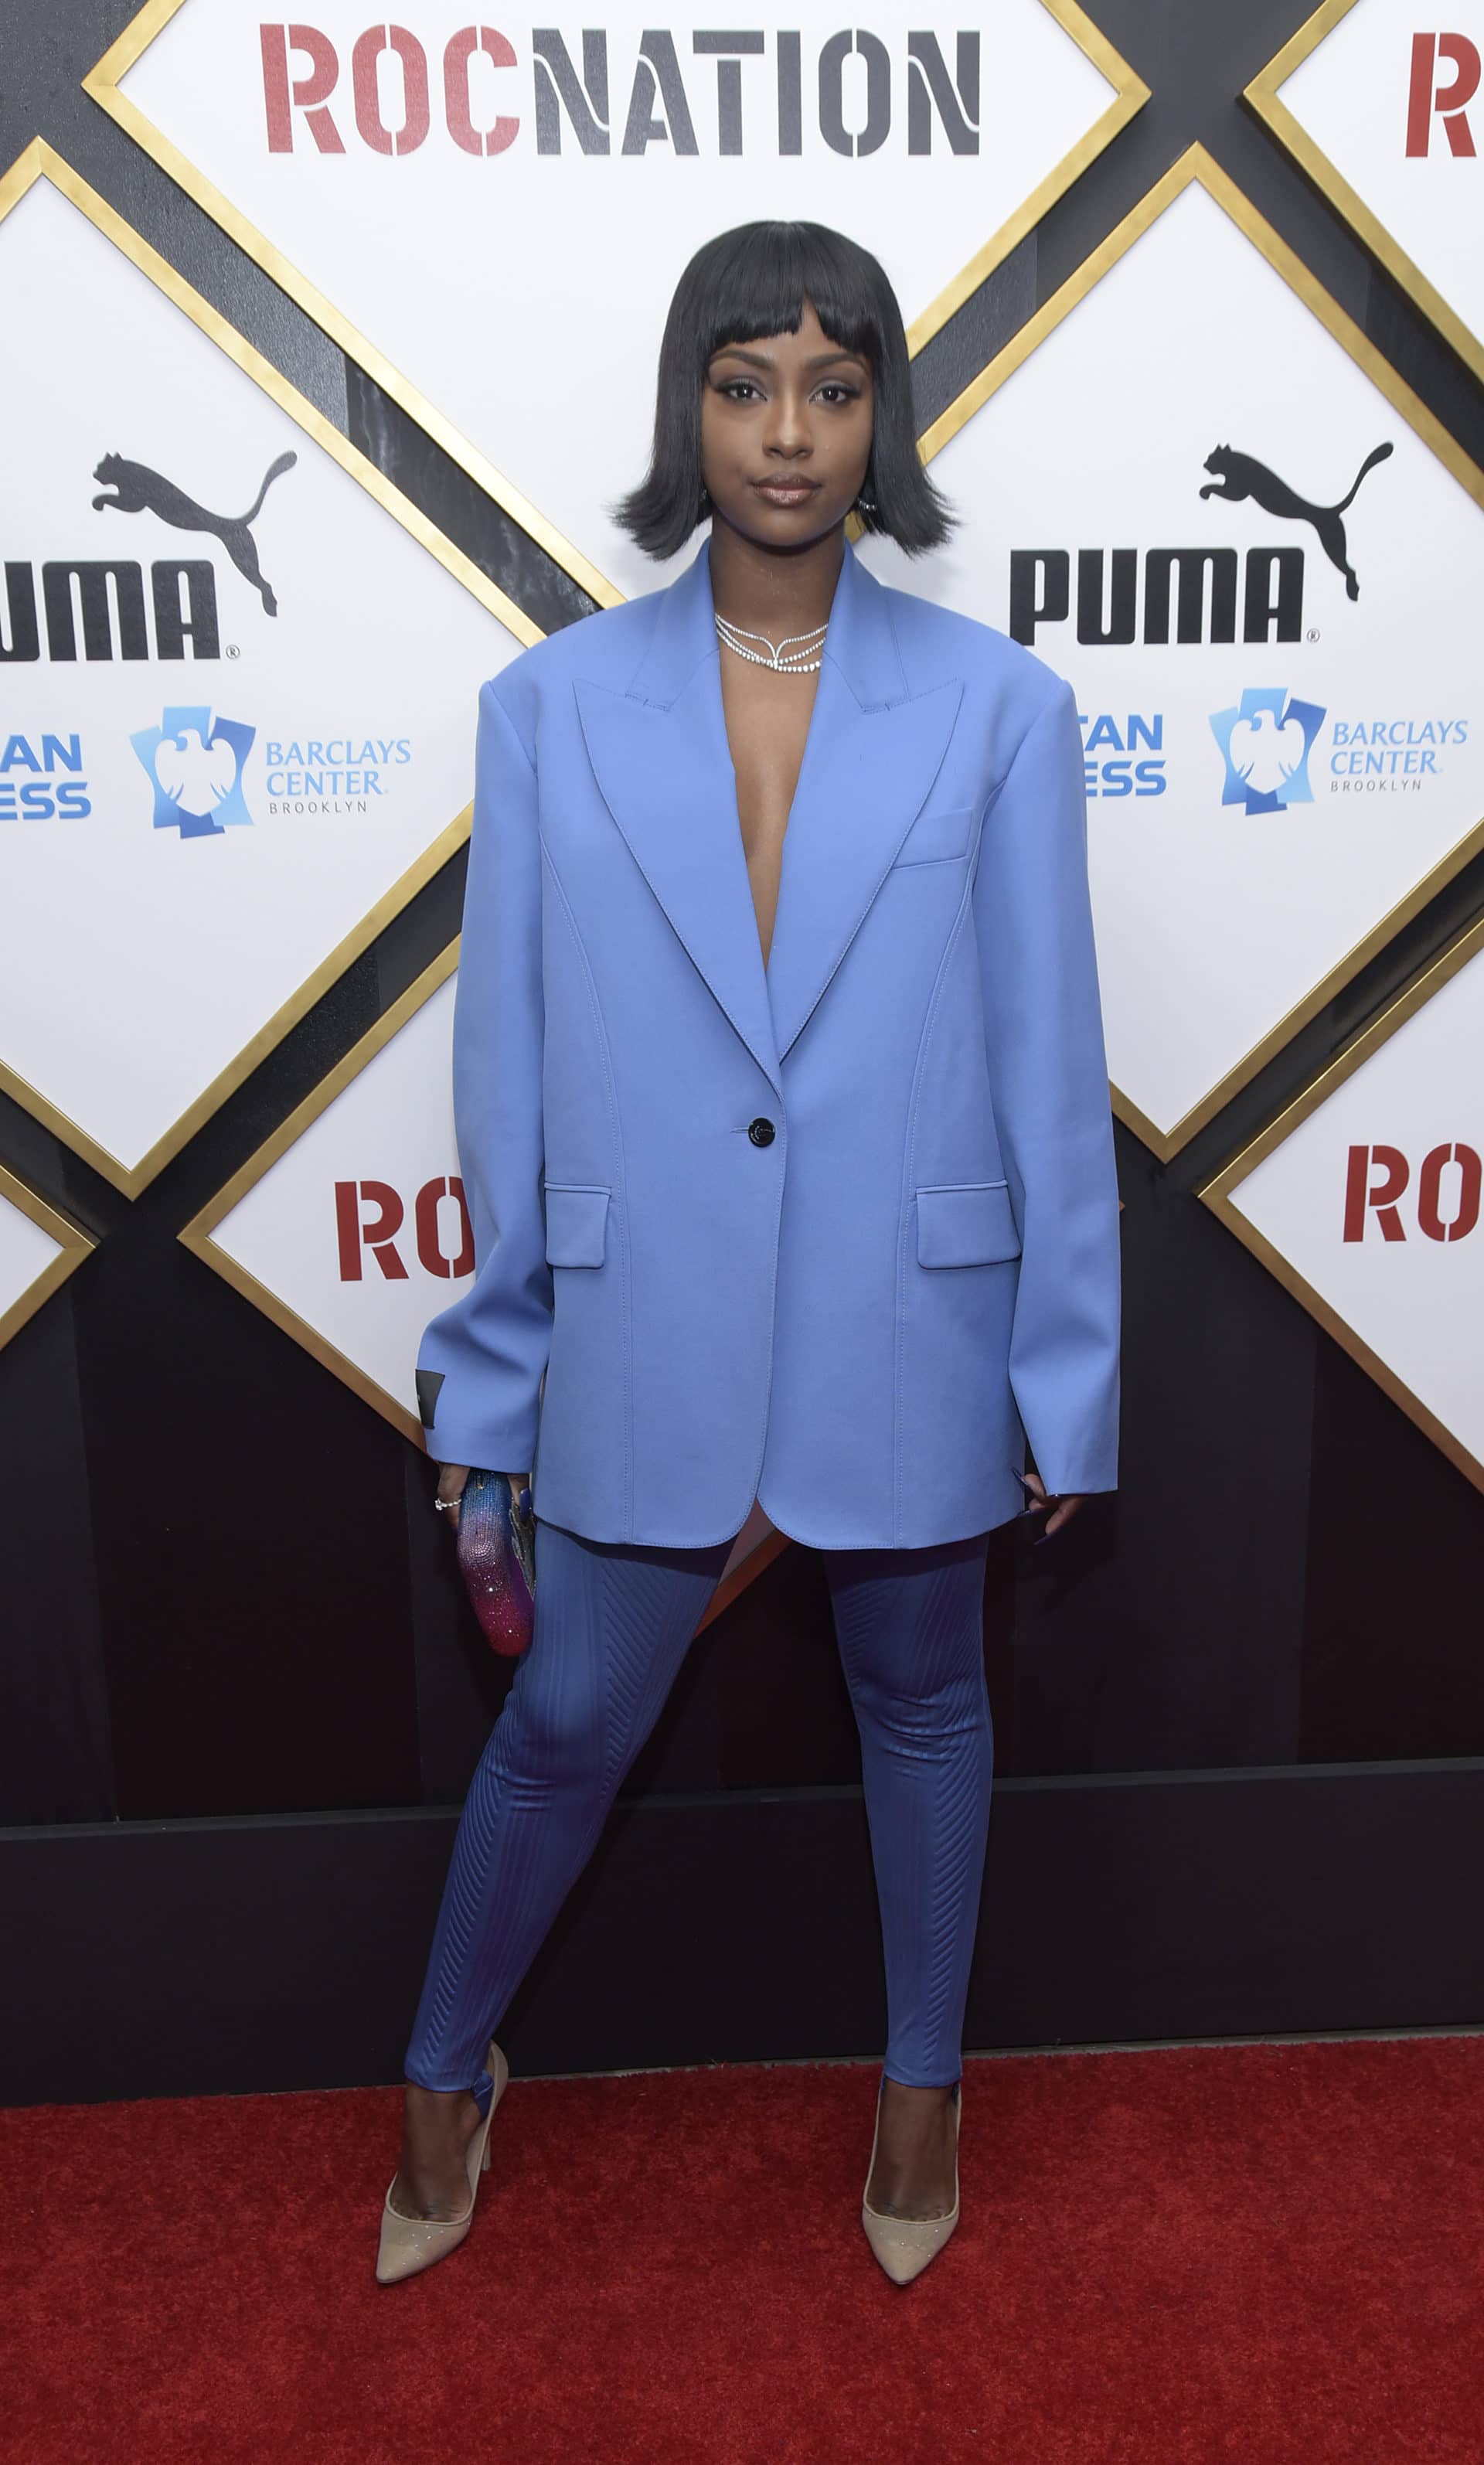 Per Usual, The Roc Nation Grammy Brunch Was An Unapologetic Celebration Of Black Excellence